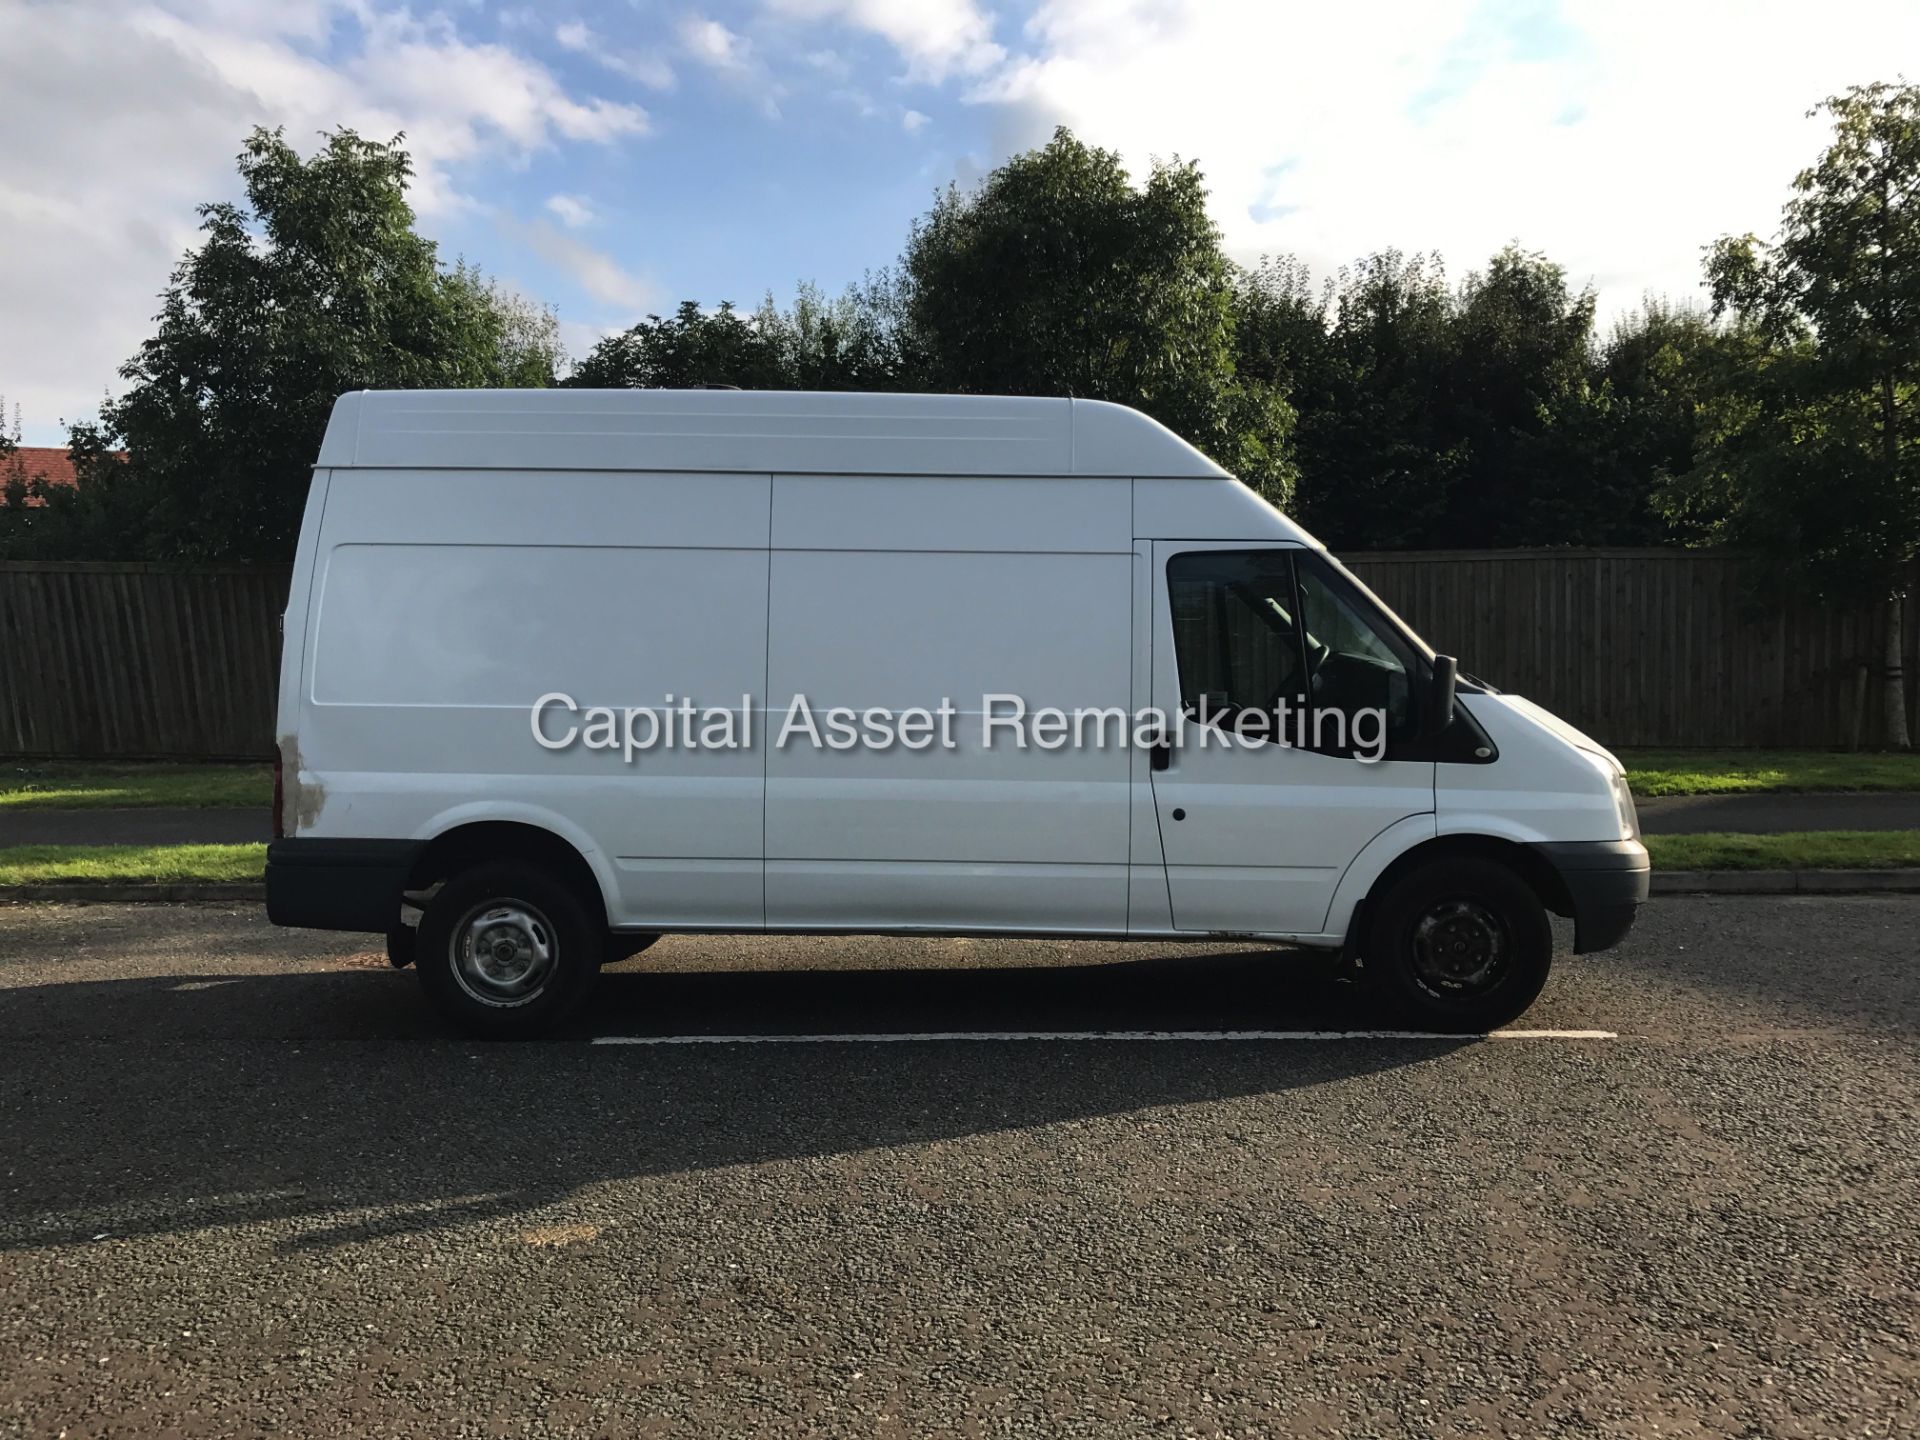 (ON SALE)FORD TRANSIT 2.4TDCI "115PSI / 6 SPEED" T350 - LWB / HIGH TOP (11 REG) LOW MILEAGE - - Image 5 of 18